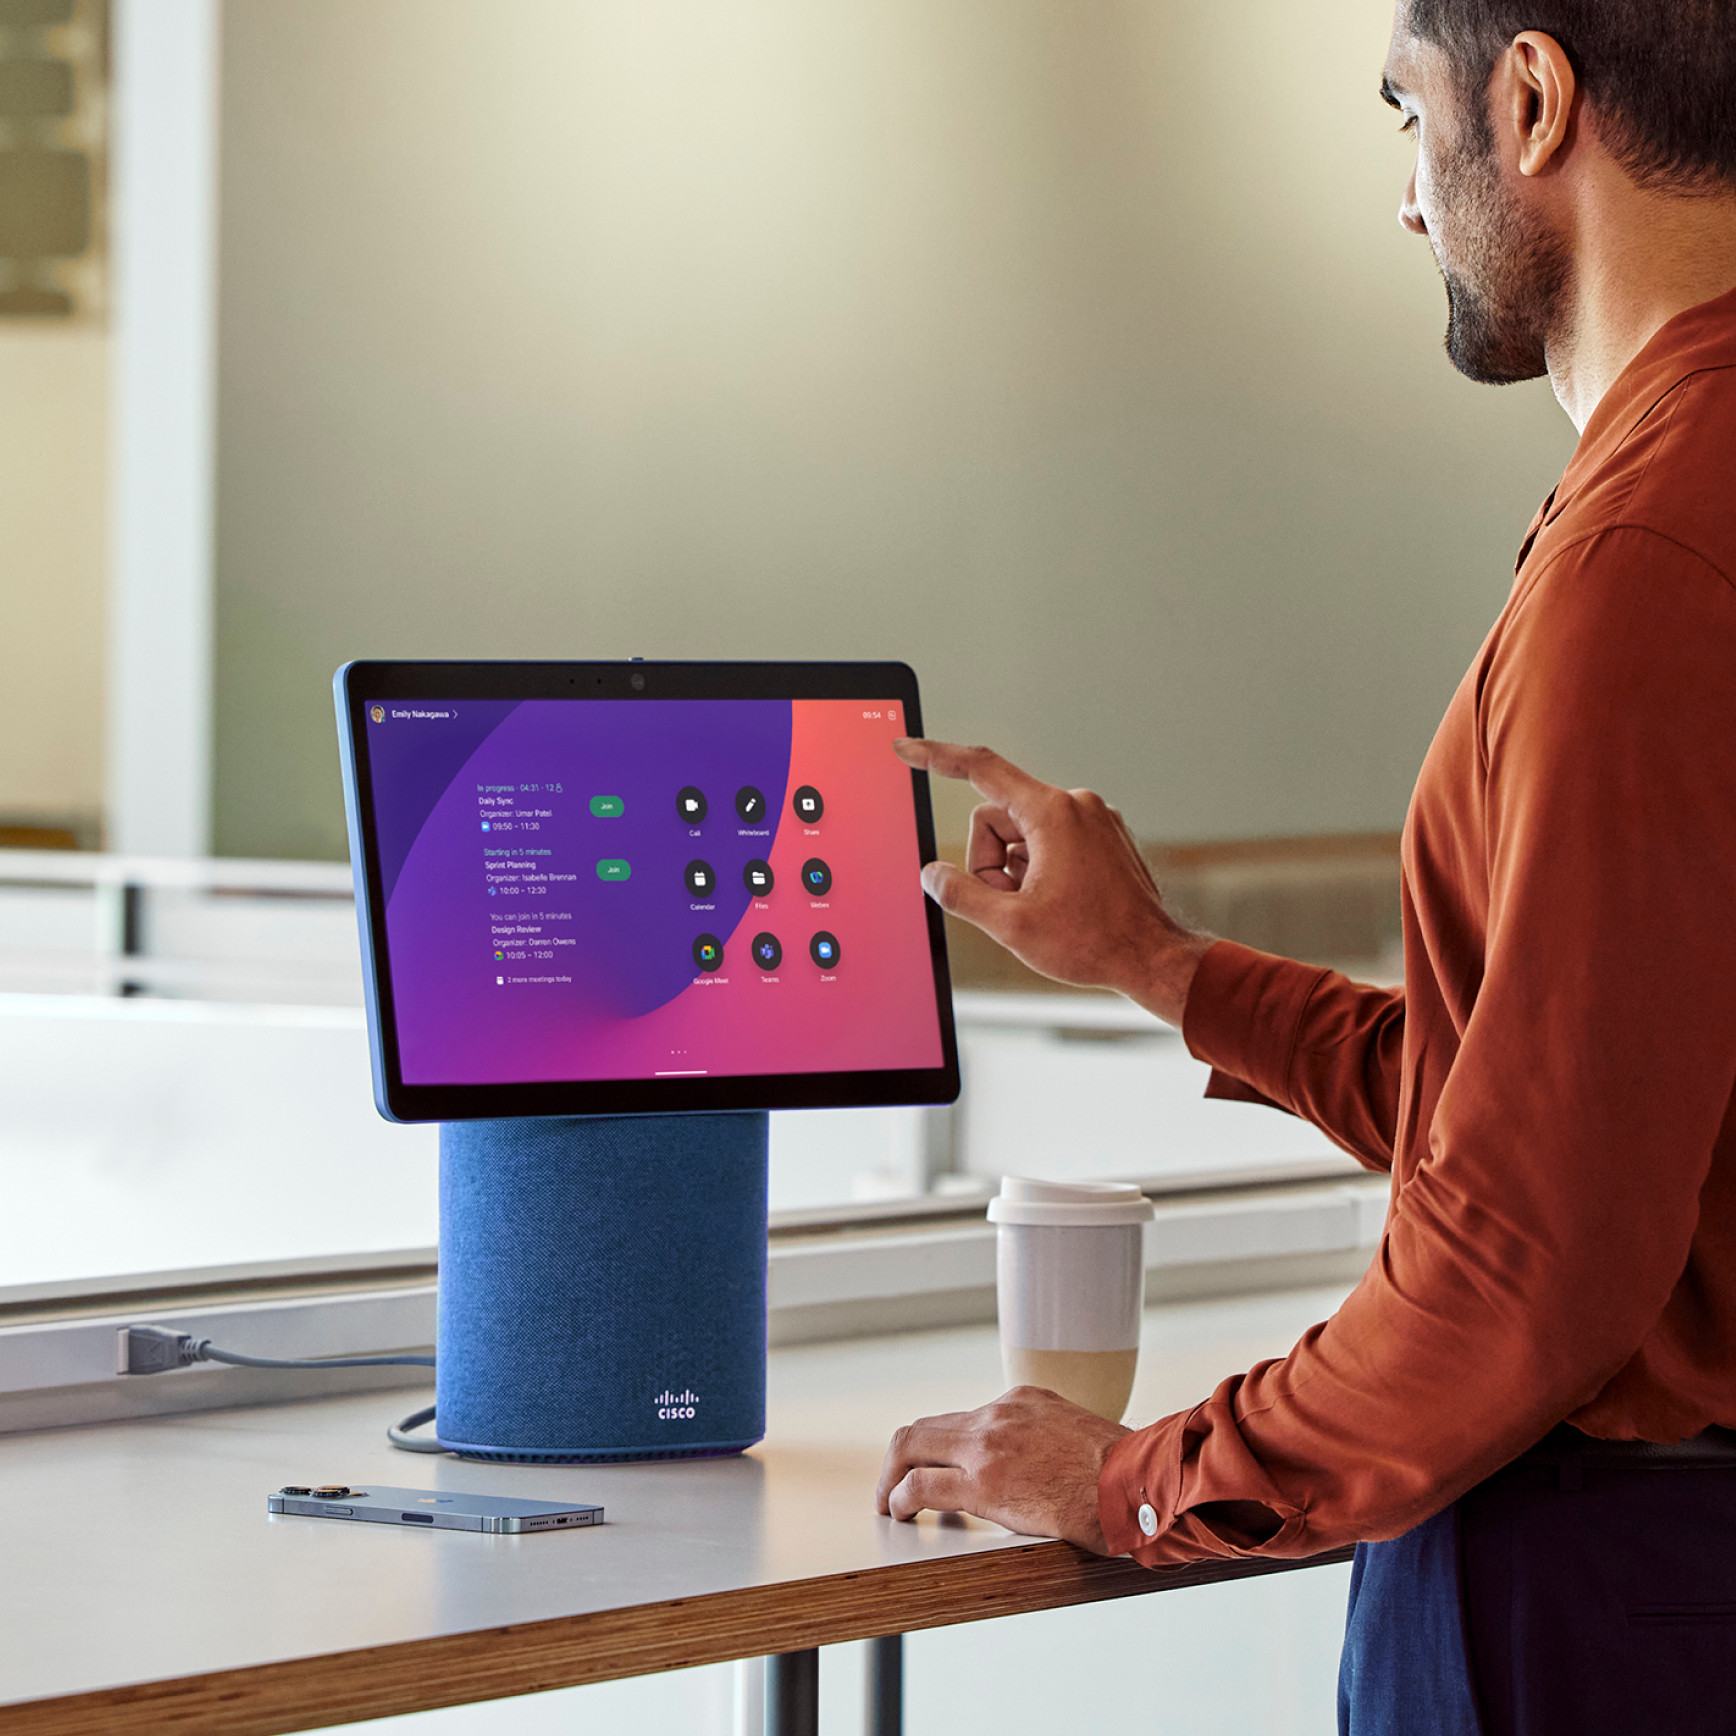 Person taps Webex Desk Mini’s touch screen to join Zoom meeting. Screen shows apps like Google Meet, Microsoft Teams, and Zoom